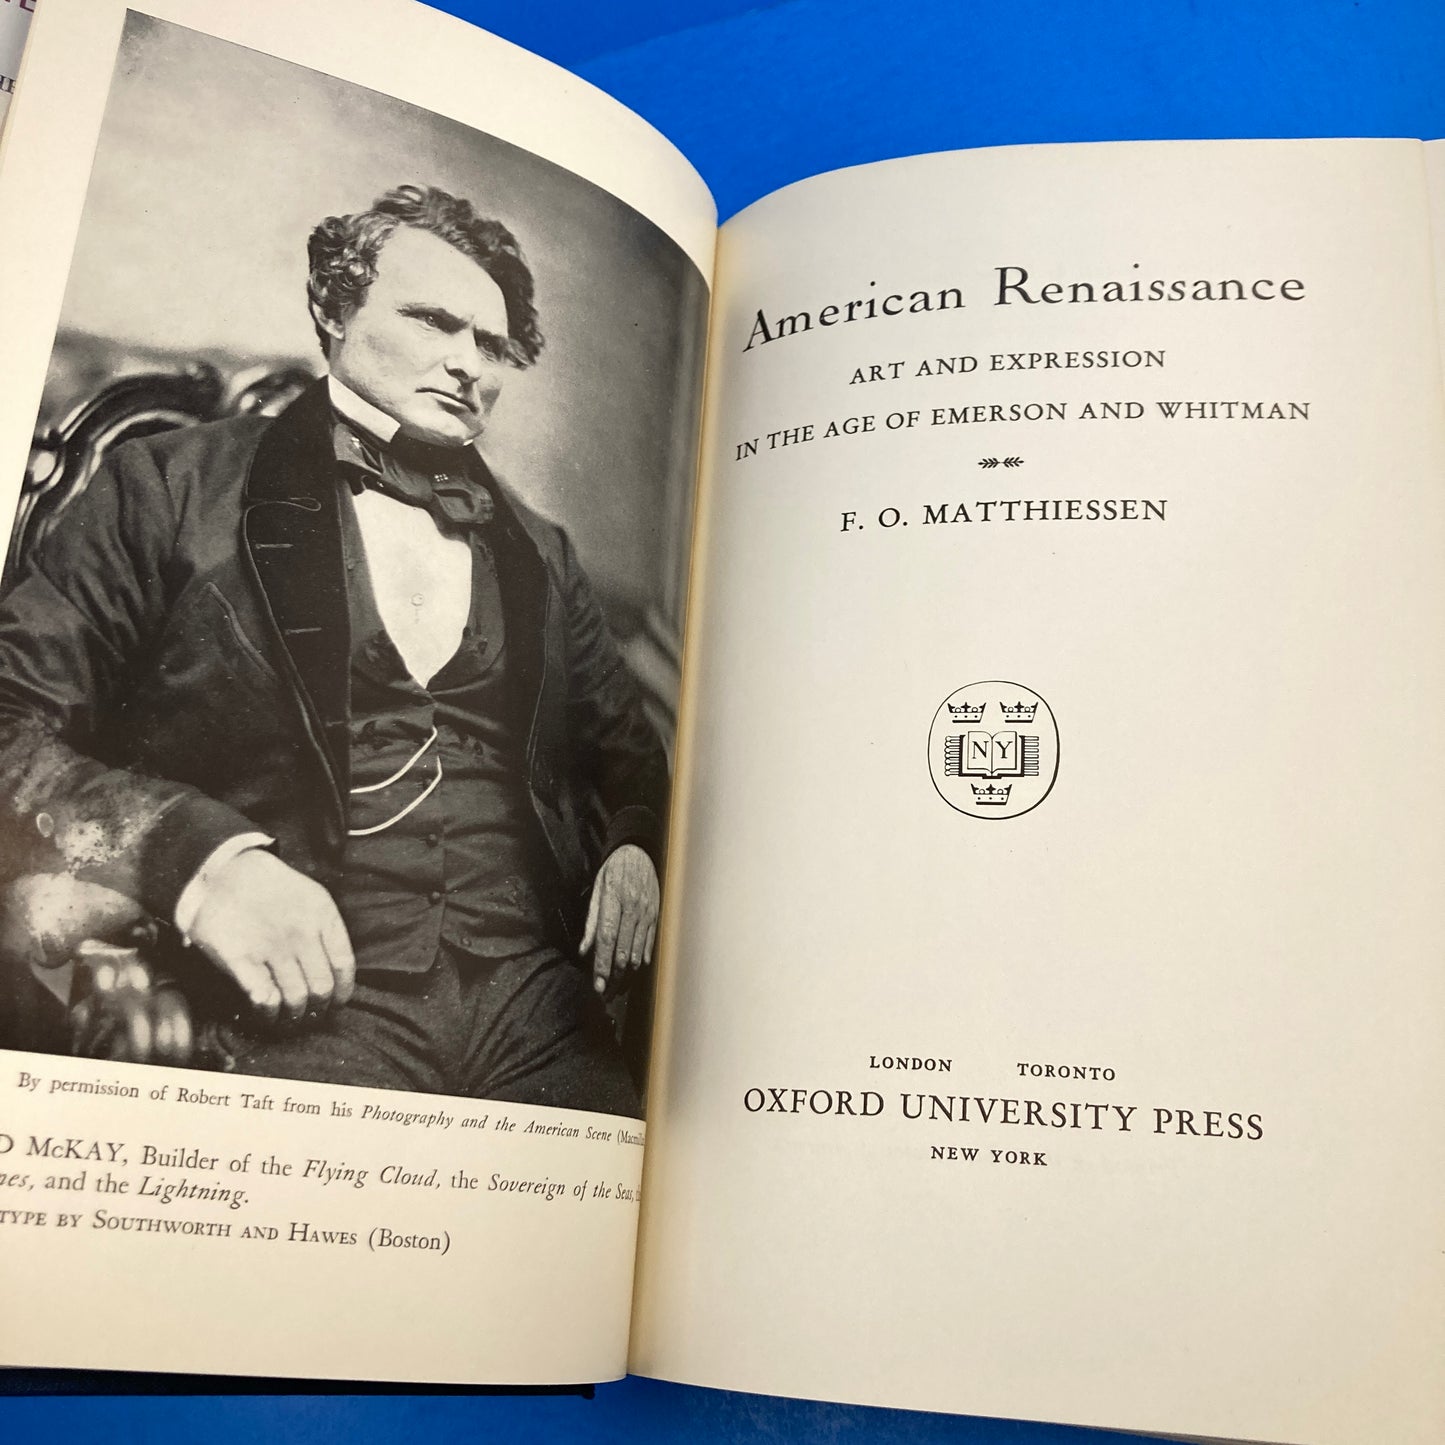 American Renaissance: Art & Expression in the Age of Emerson & Whitman